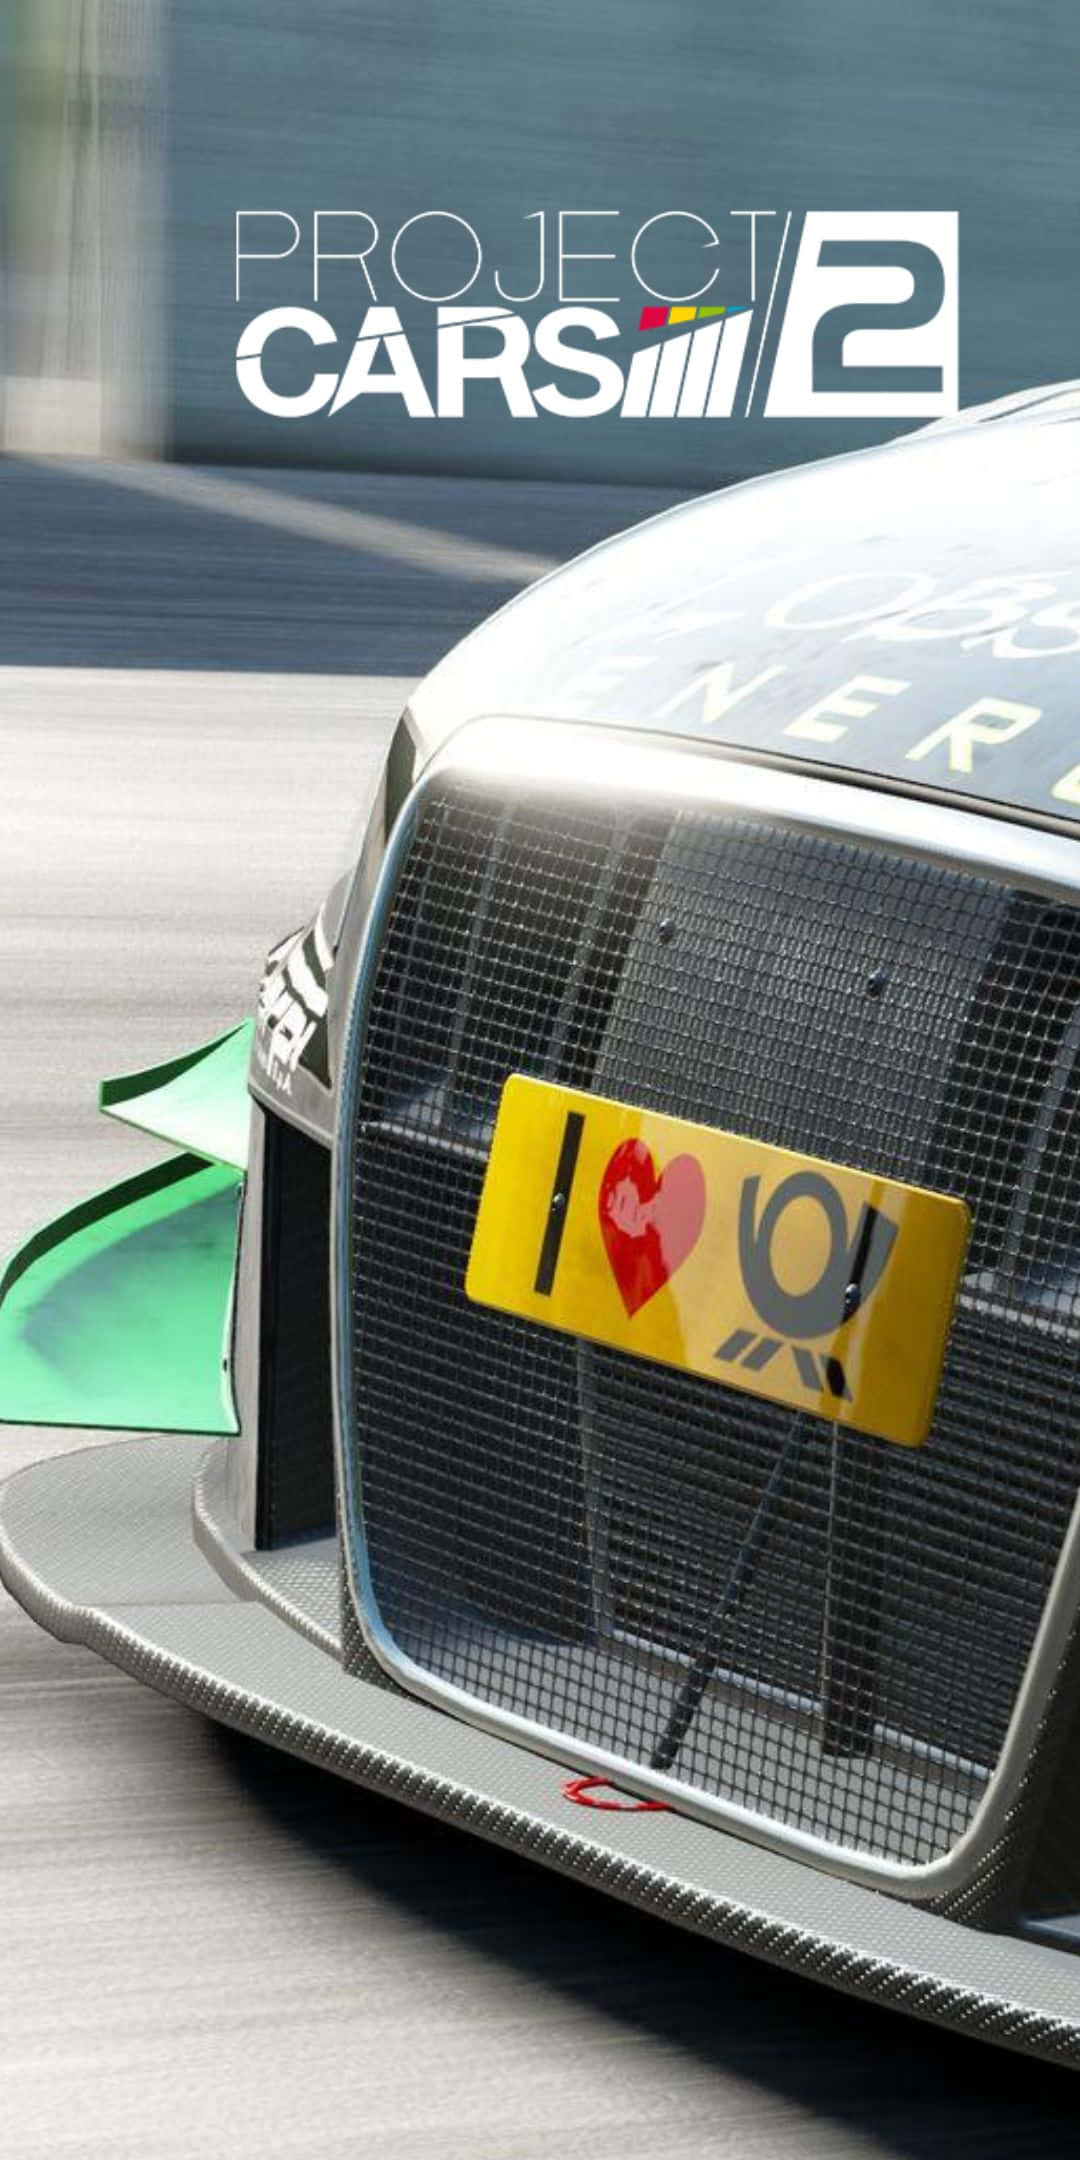 Experience the Level of Realism in Project Cars 2 with Pixel 3